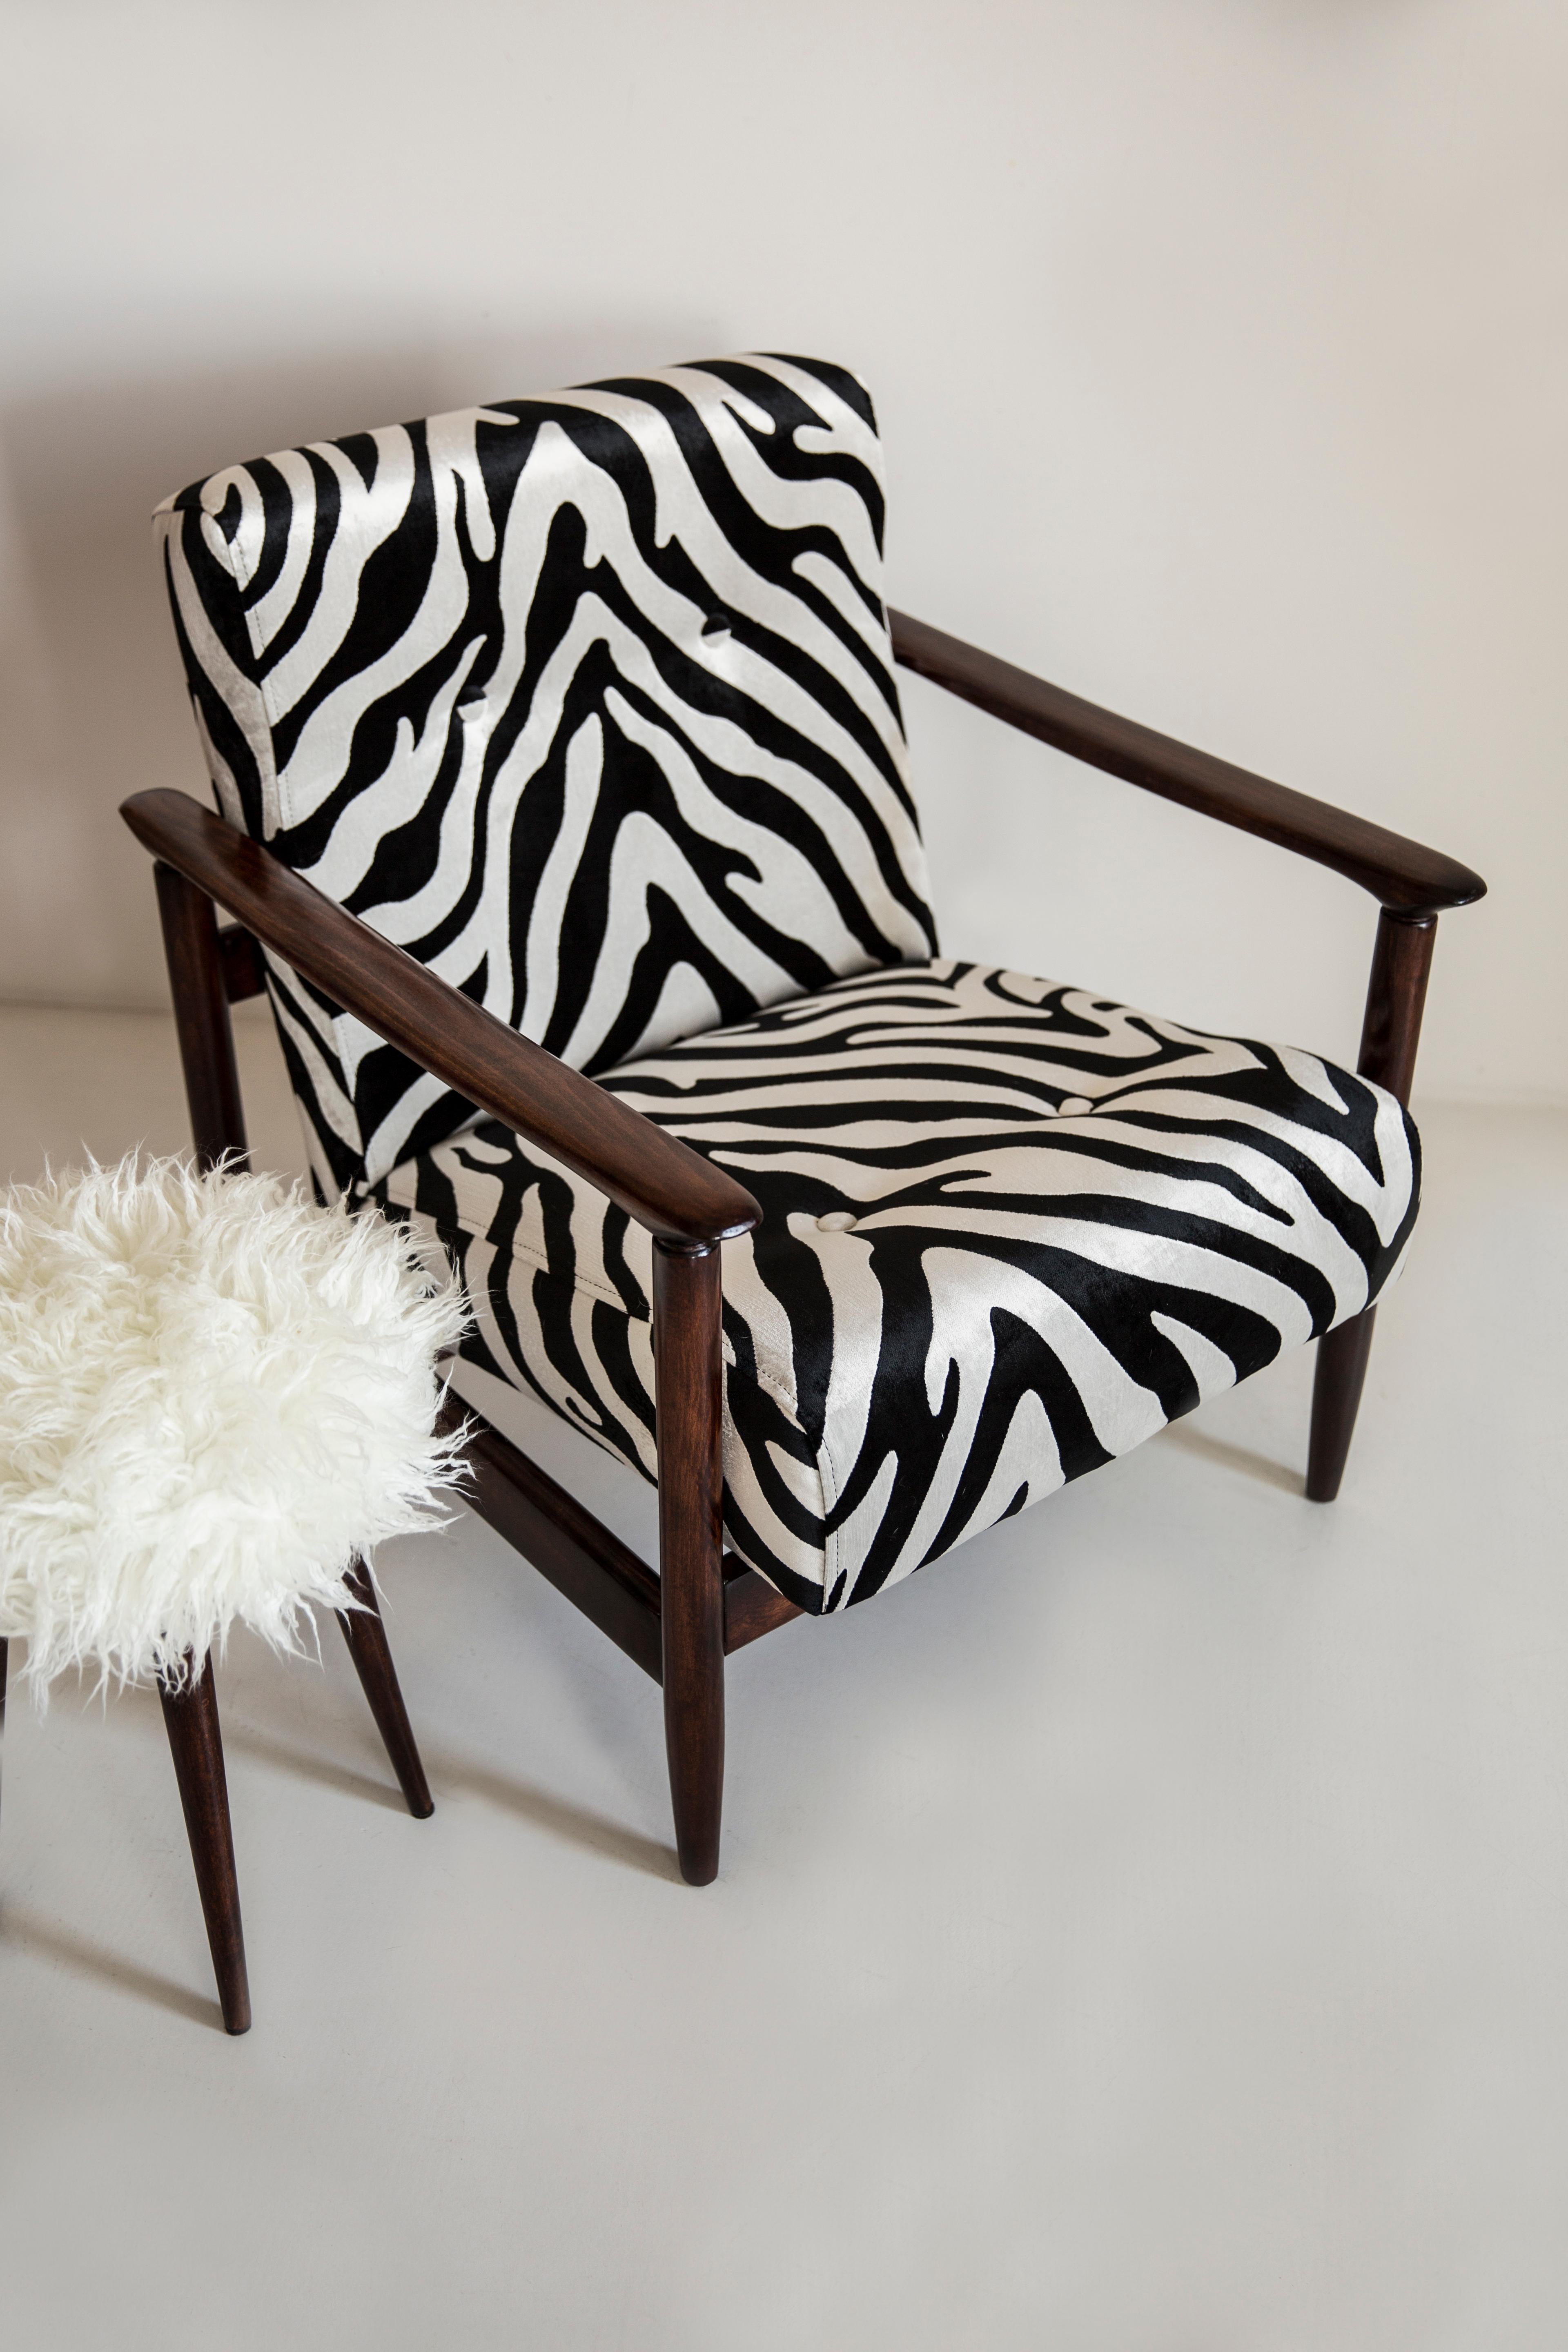 Beautiful Zebra Velvet Armchair GFM-142, designed by Edmund Homa, a polish architect, designer of Industrial Design and interior architecture, professor at the Academy of Fine Arts in Gdansk. 

The armchair was made in the 1960s in the Gosciecinska